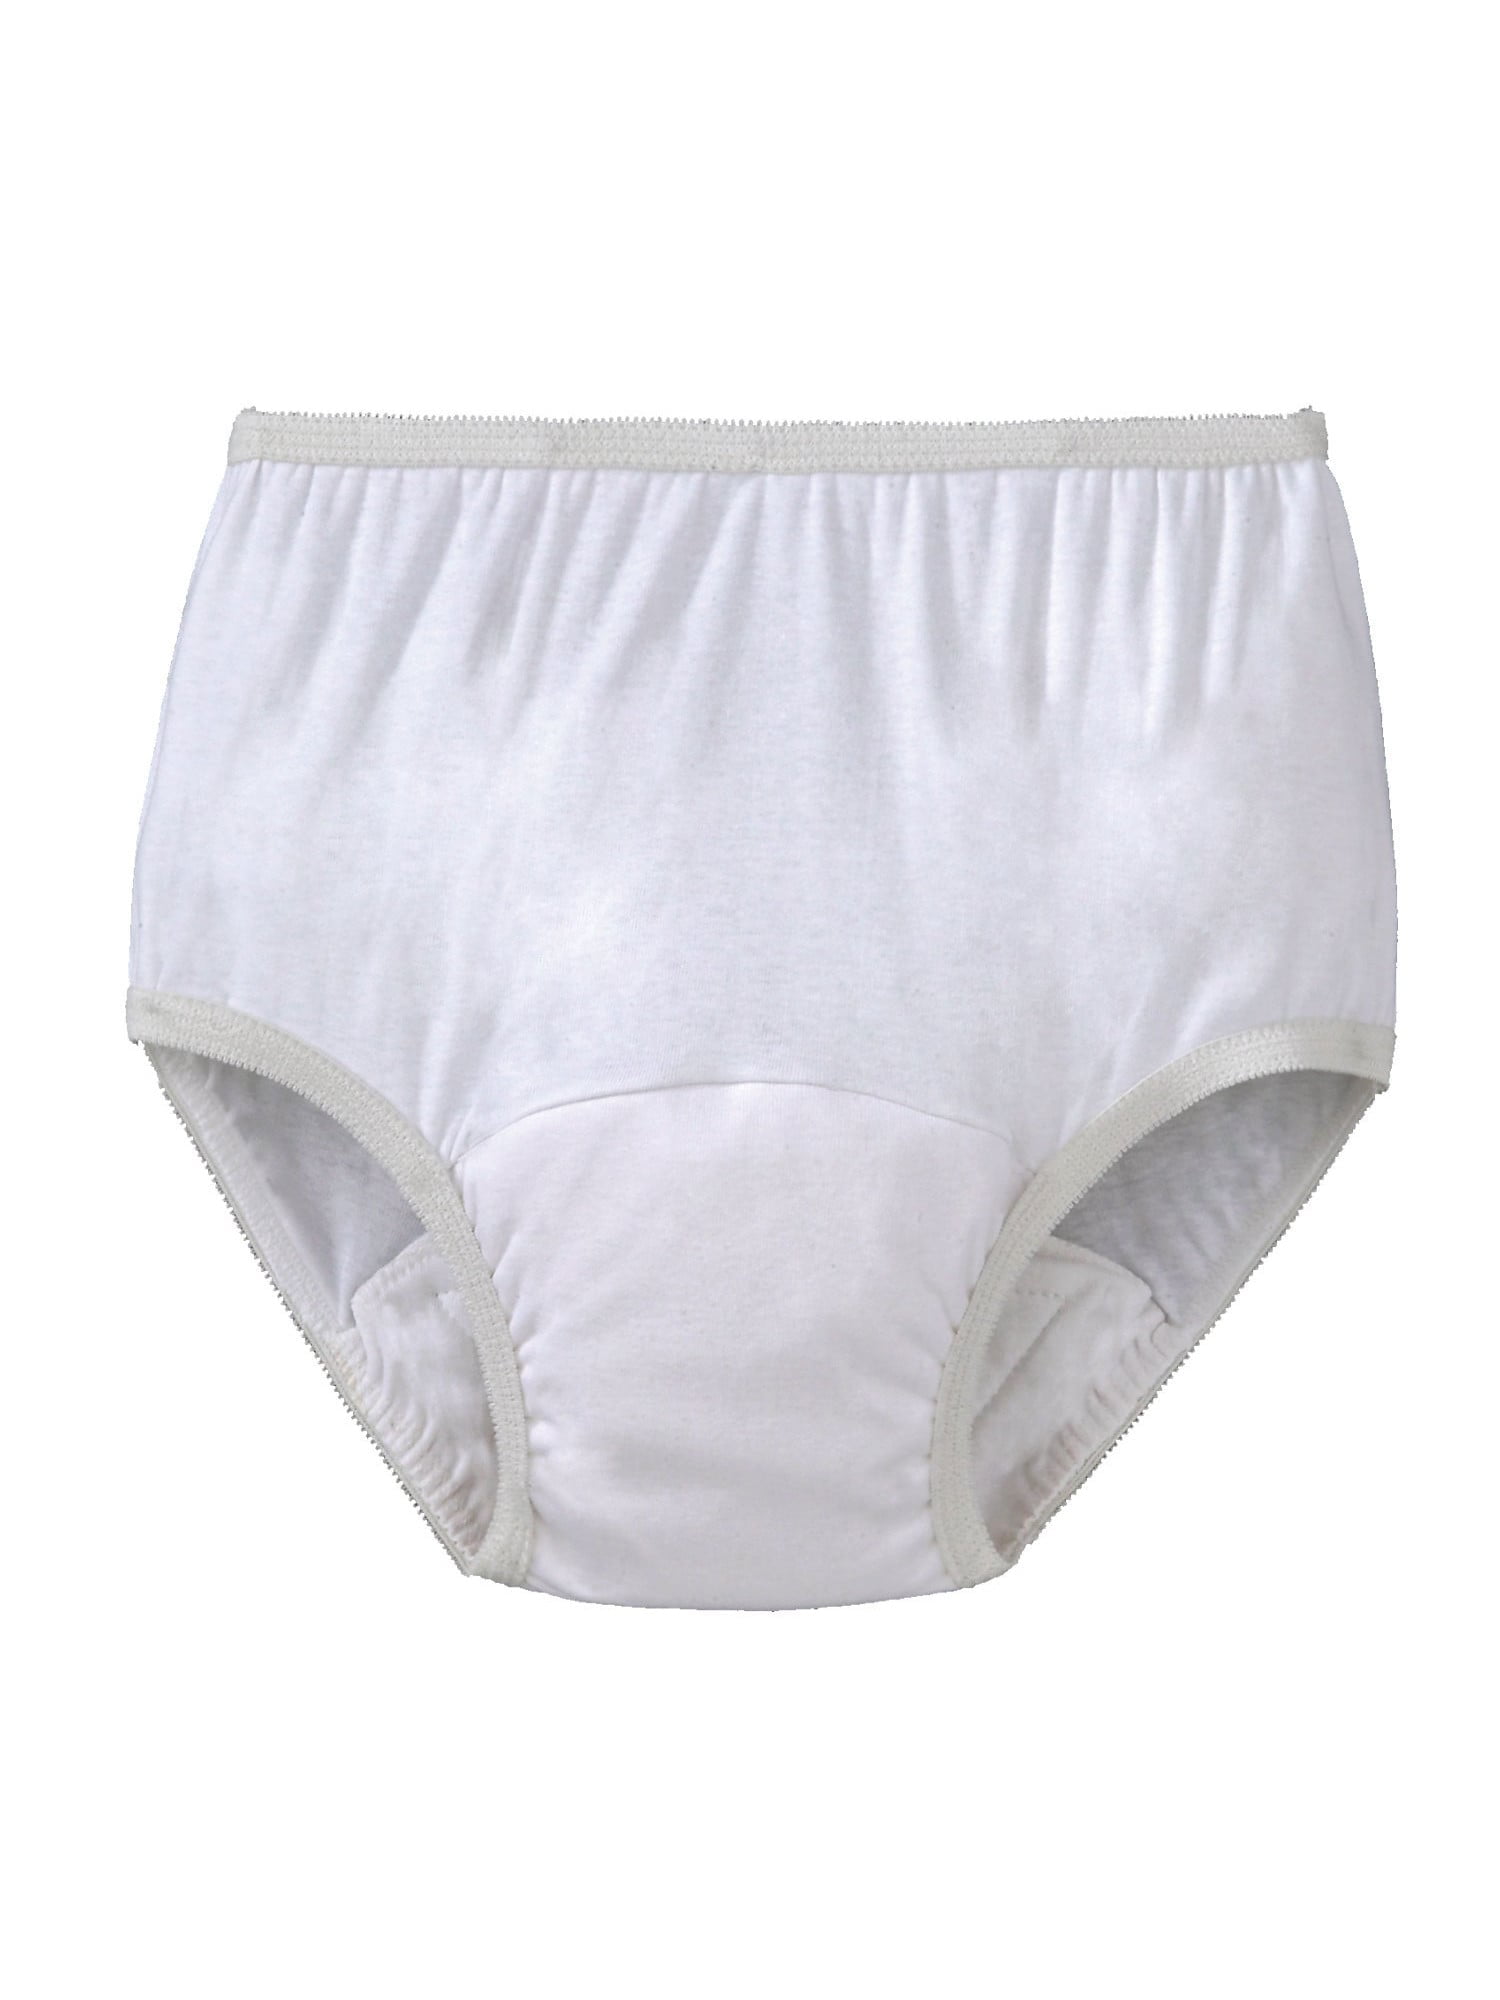 Comfort Finds Ladies Reusable Incontinence Panty 10oz 